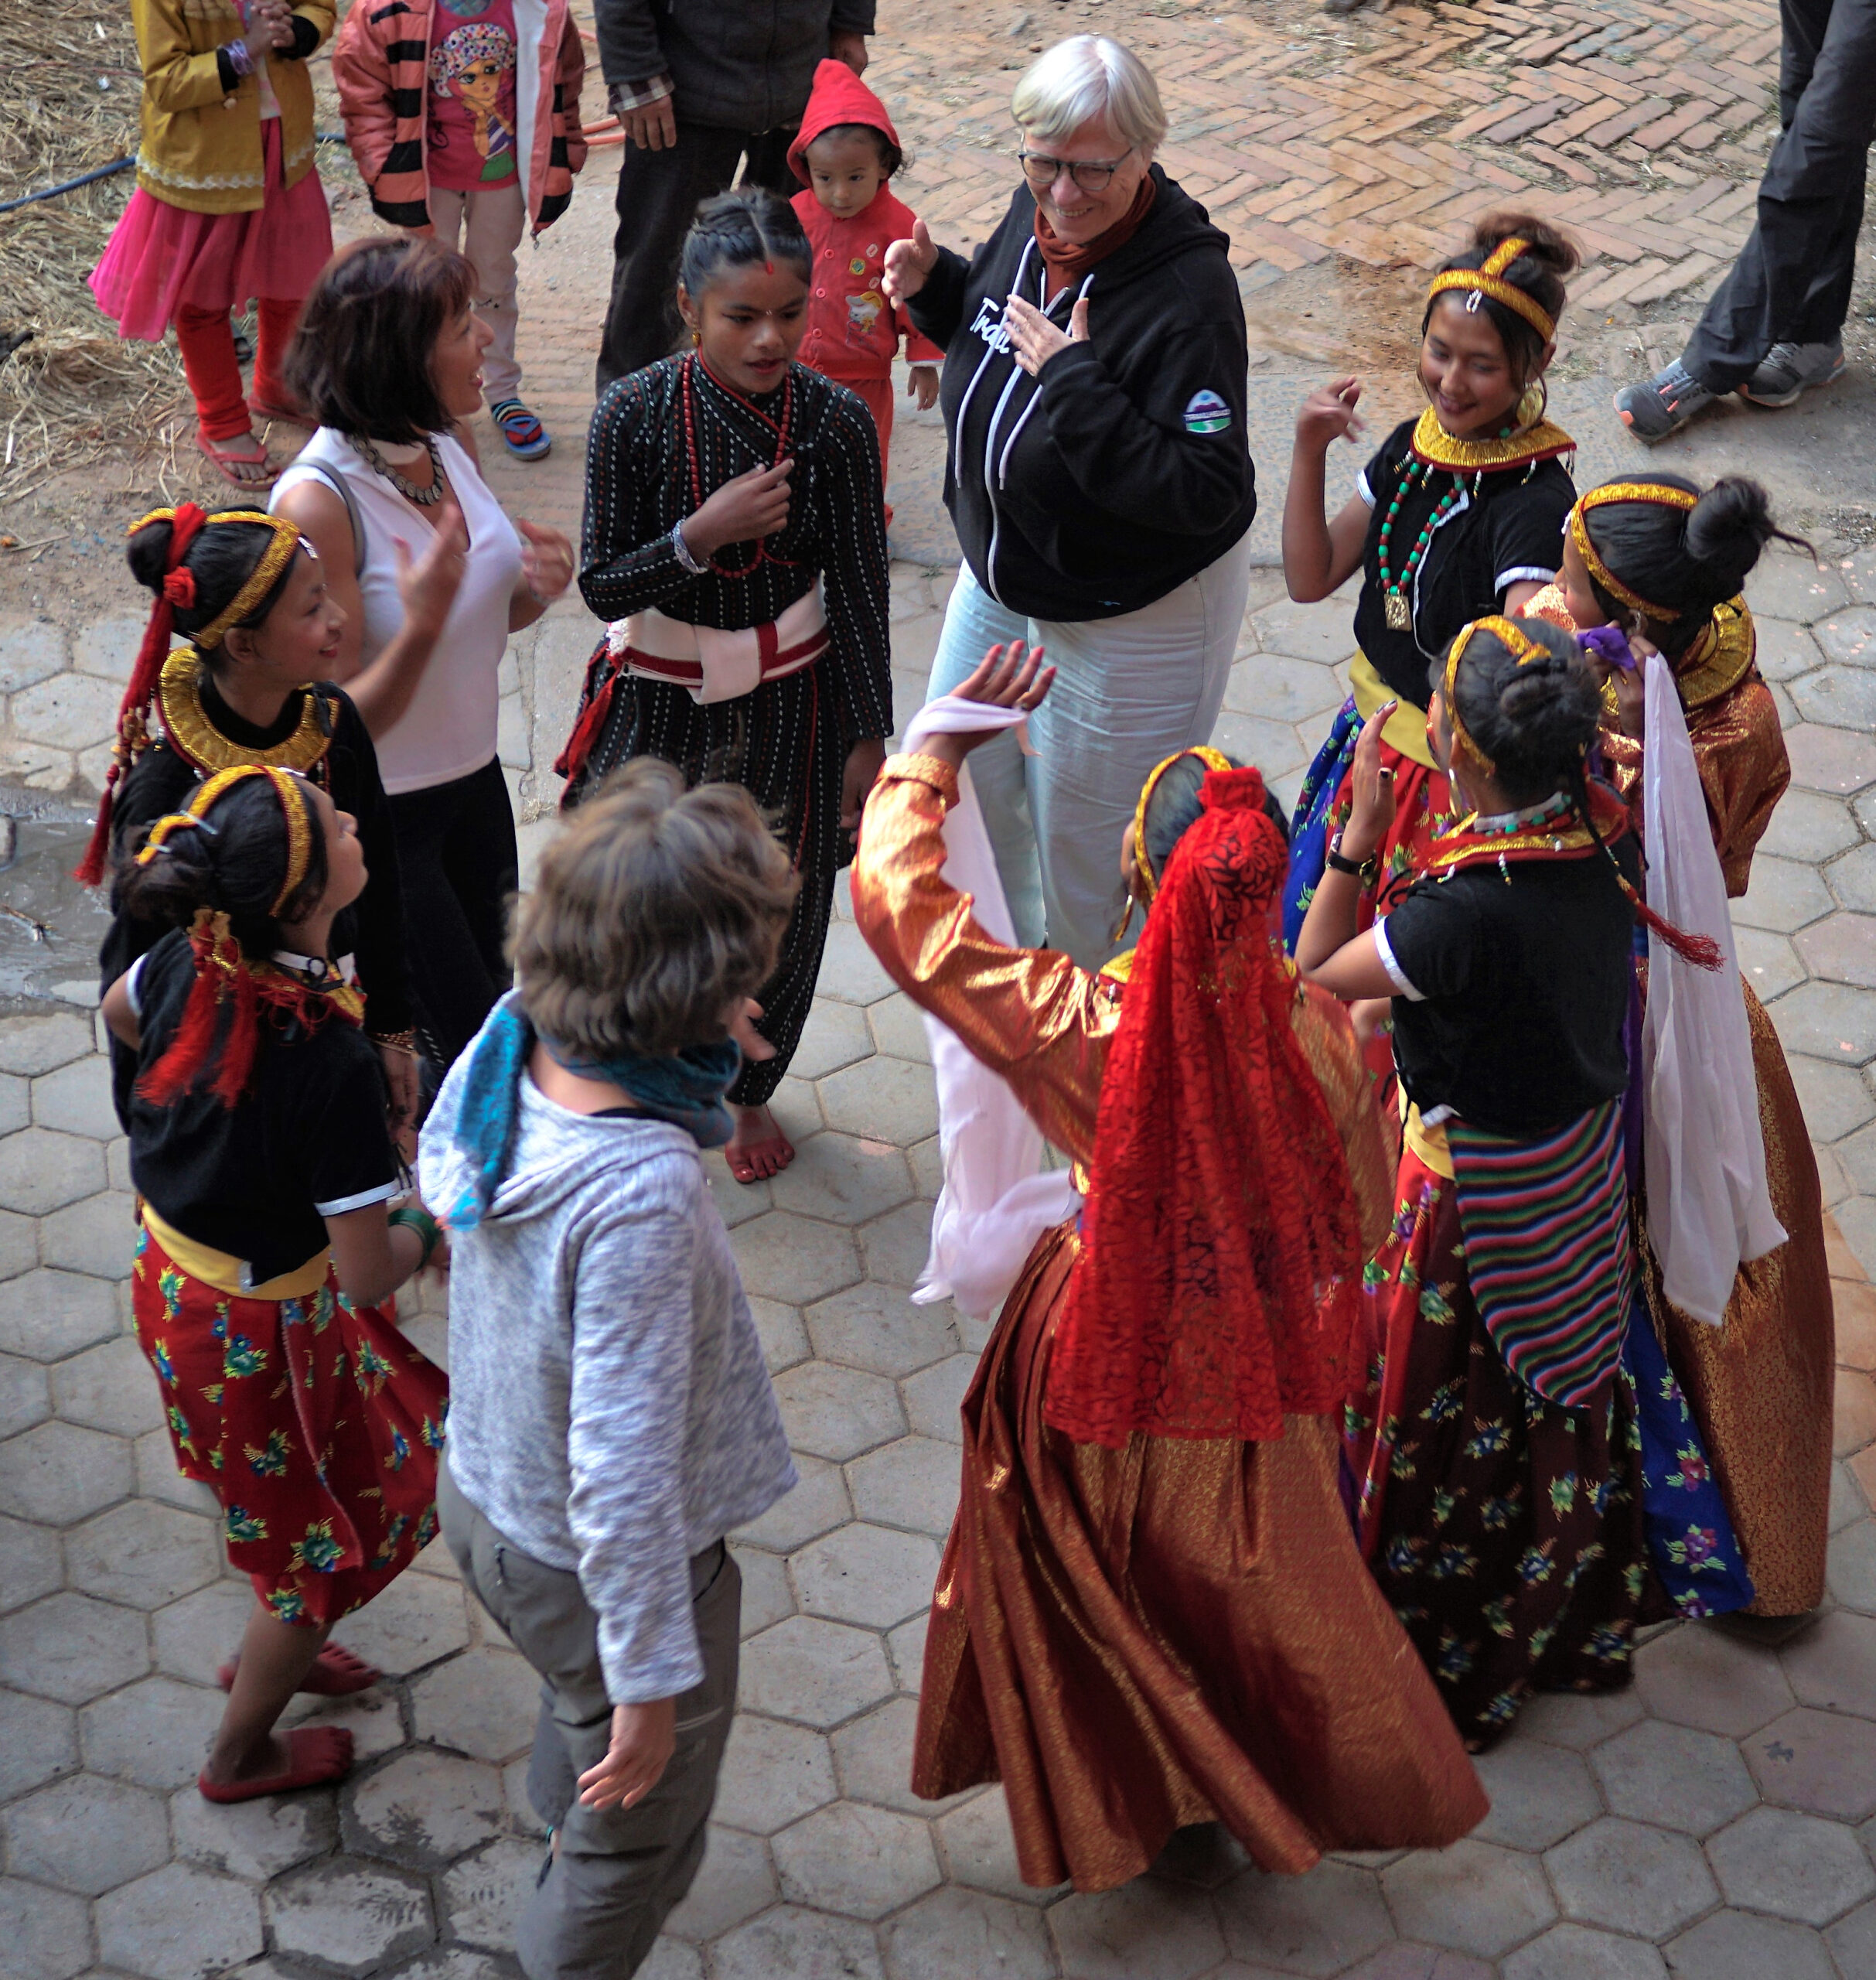 Trish dancing with women from the local community